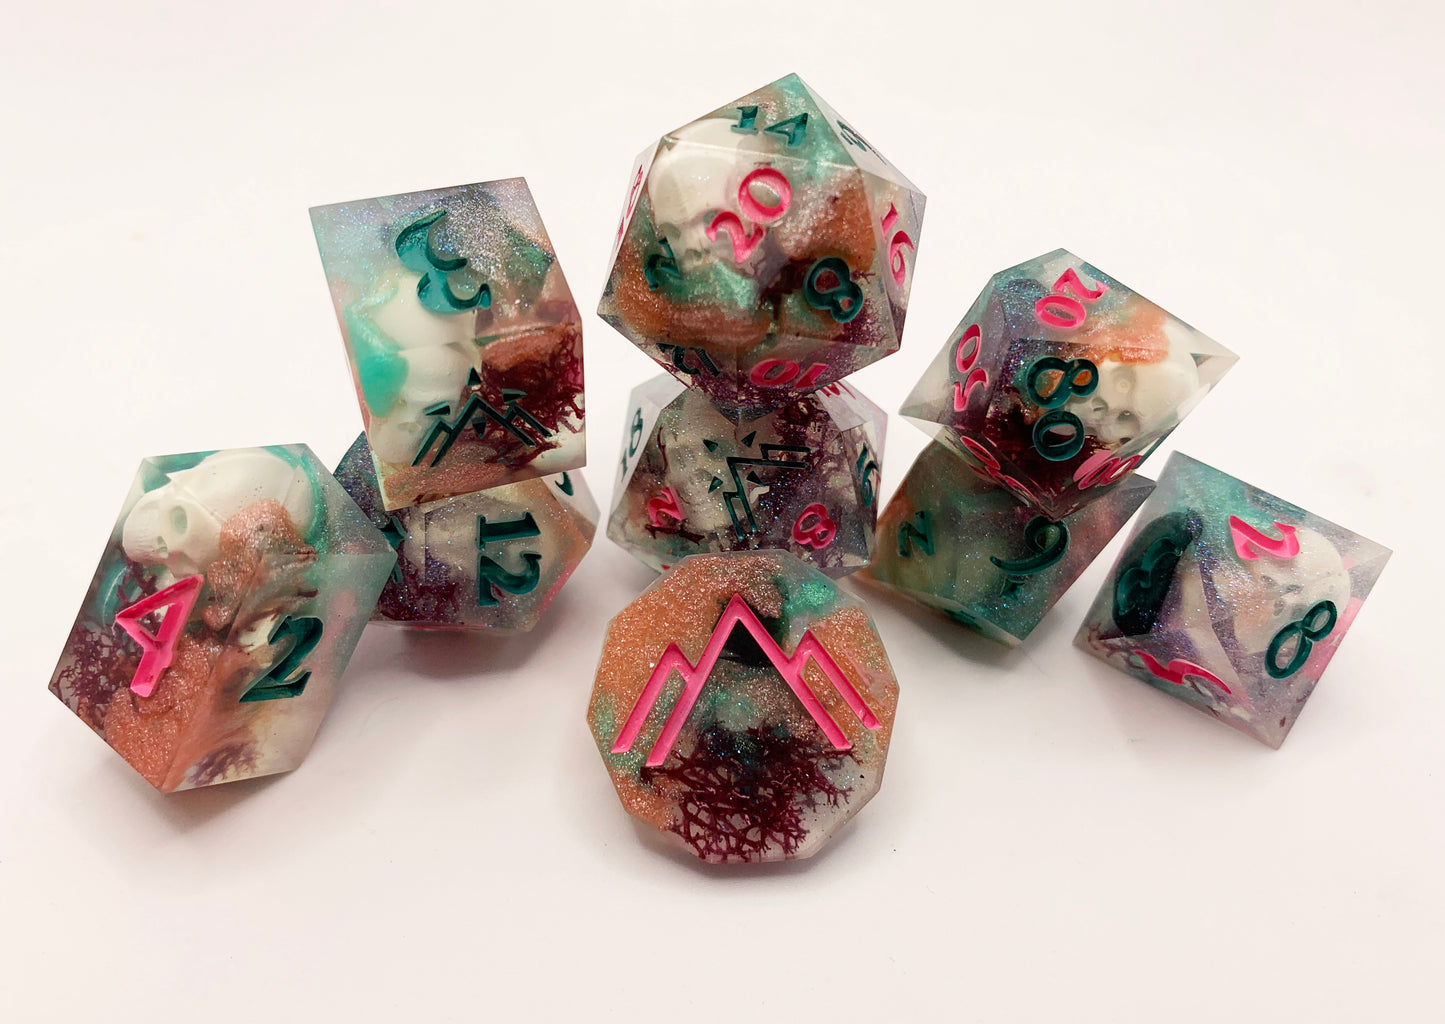 PREORDER "Blooming Grove" 9 Piece Dice Set